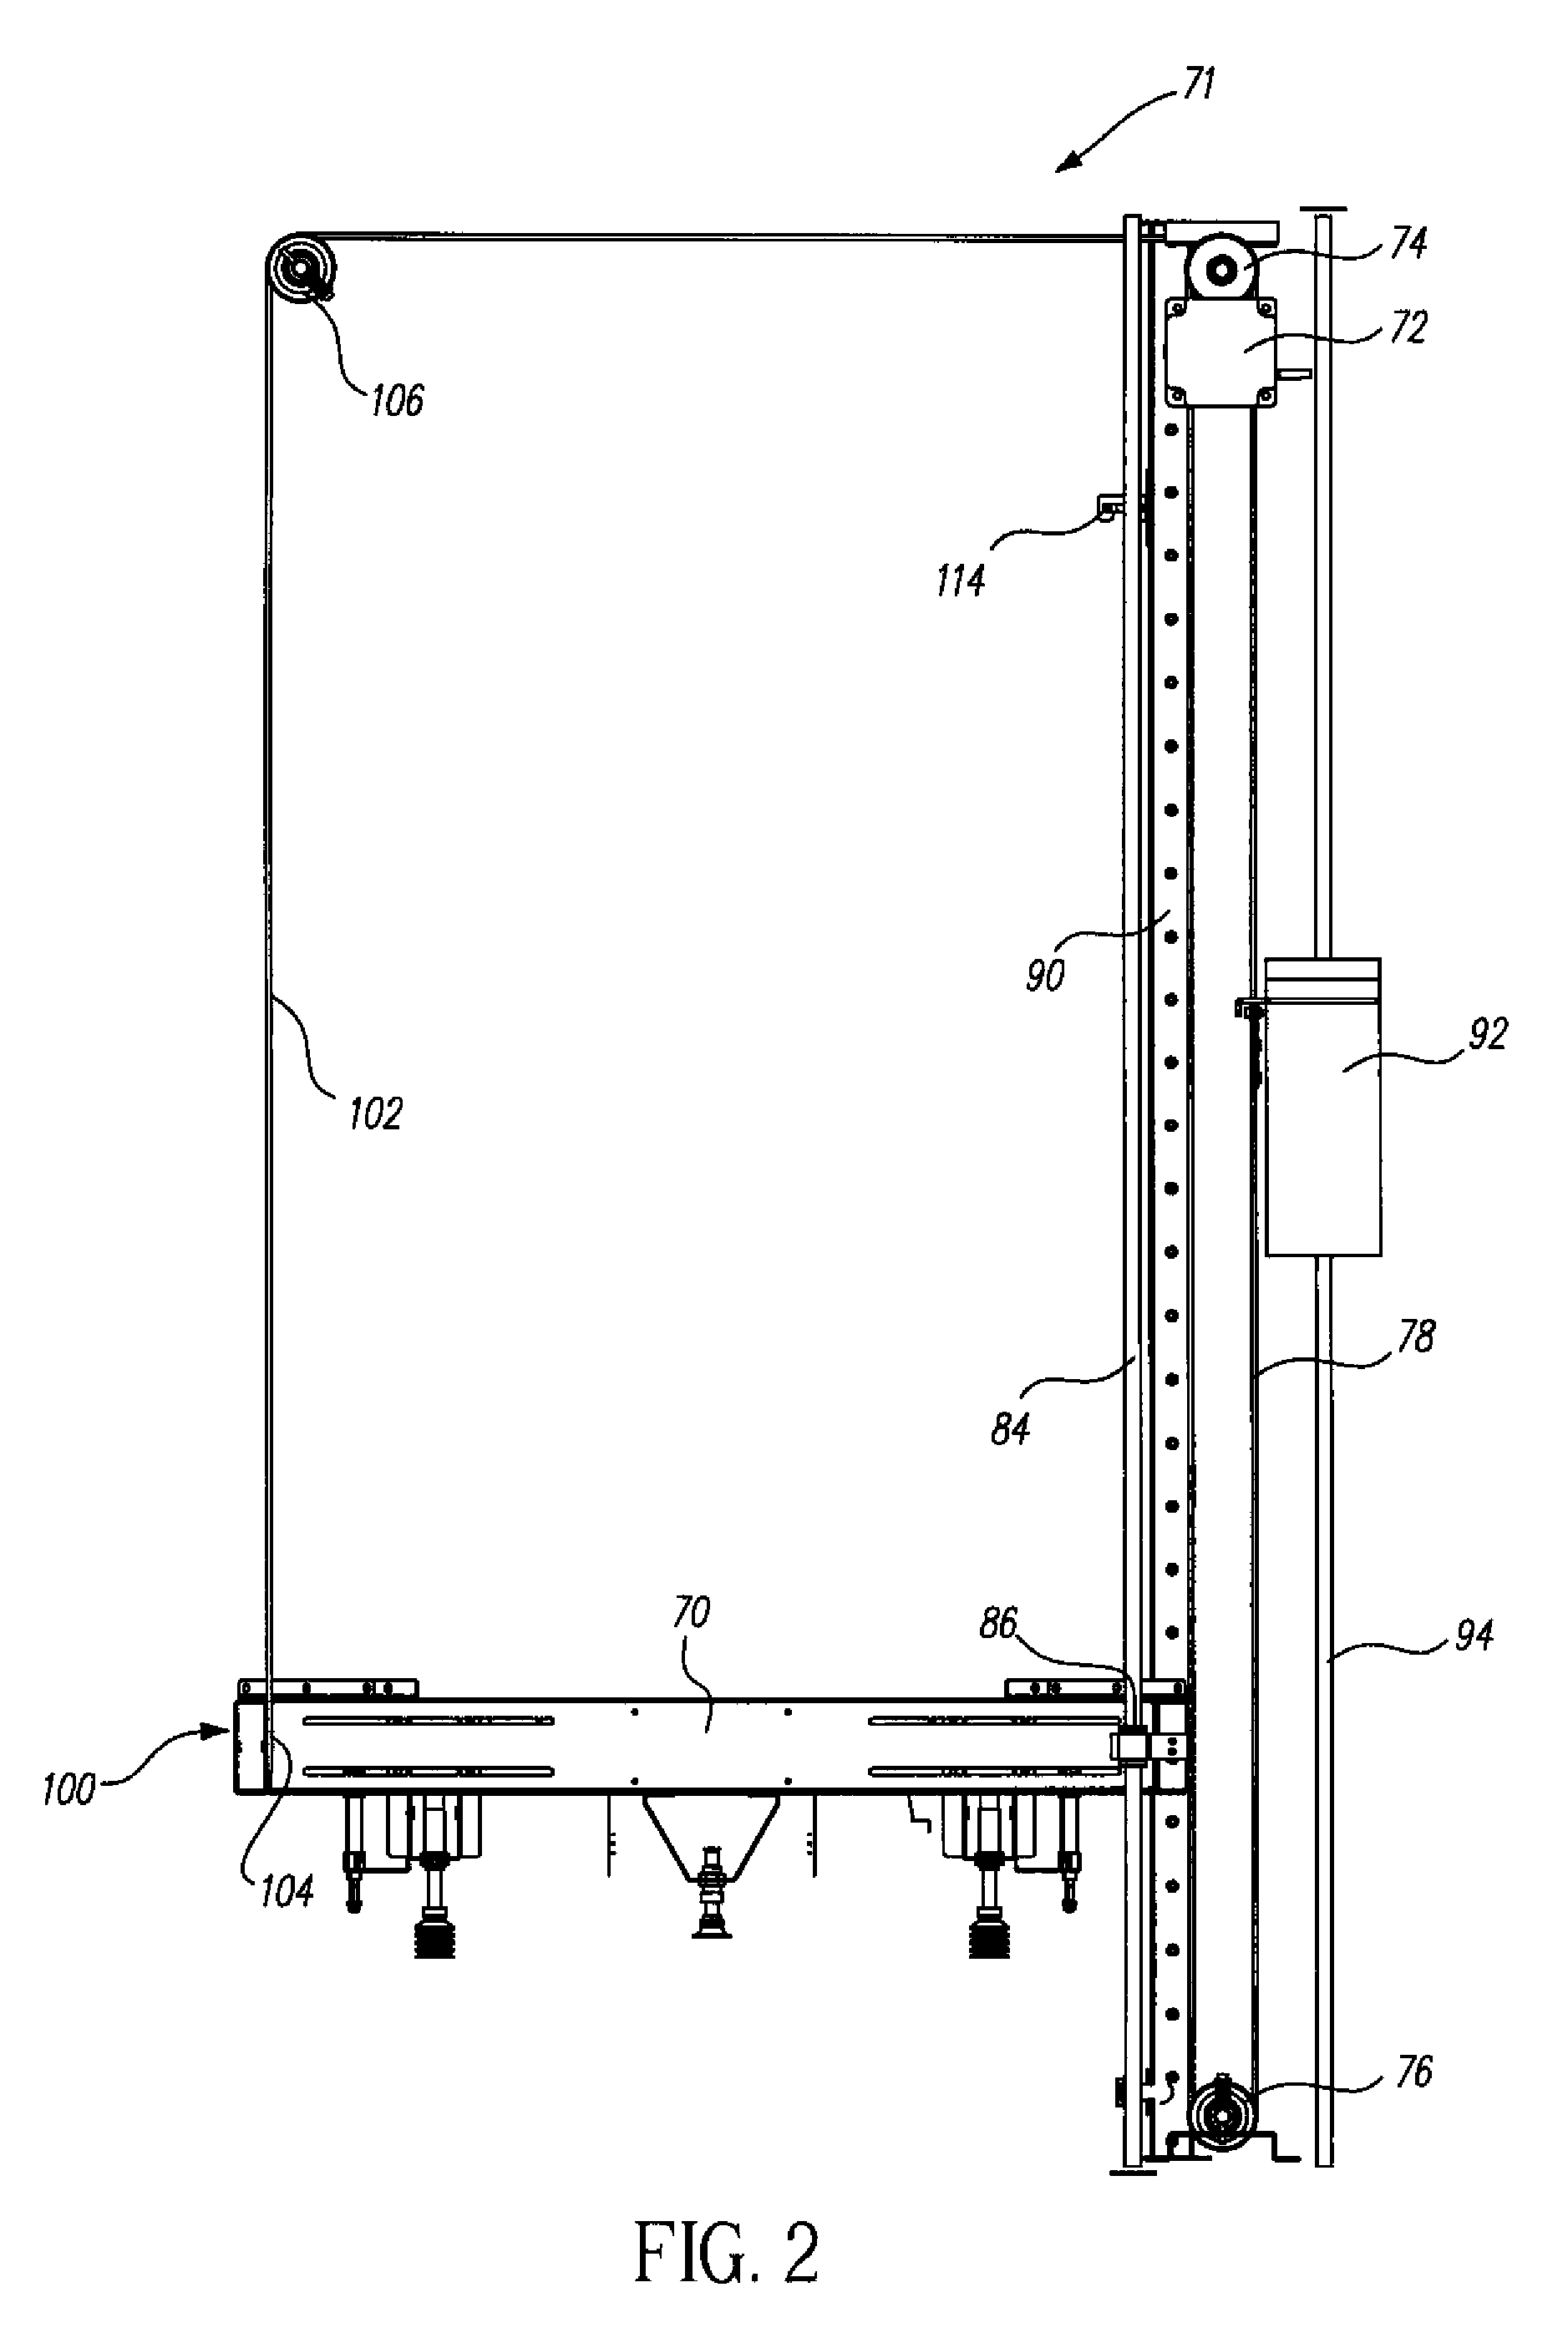 Method and apparatus for separating media combinations from a media stack